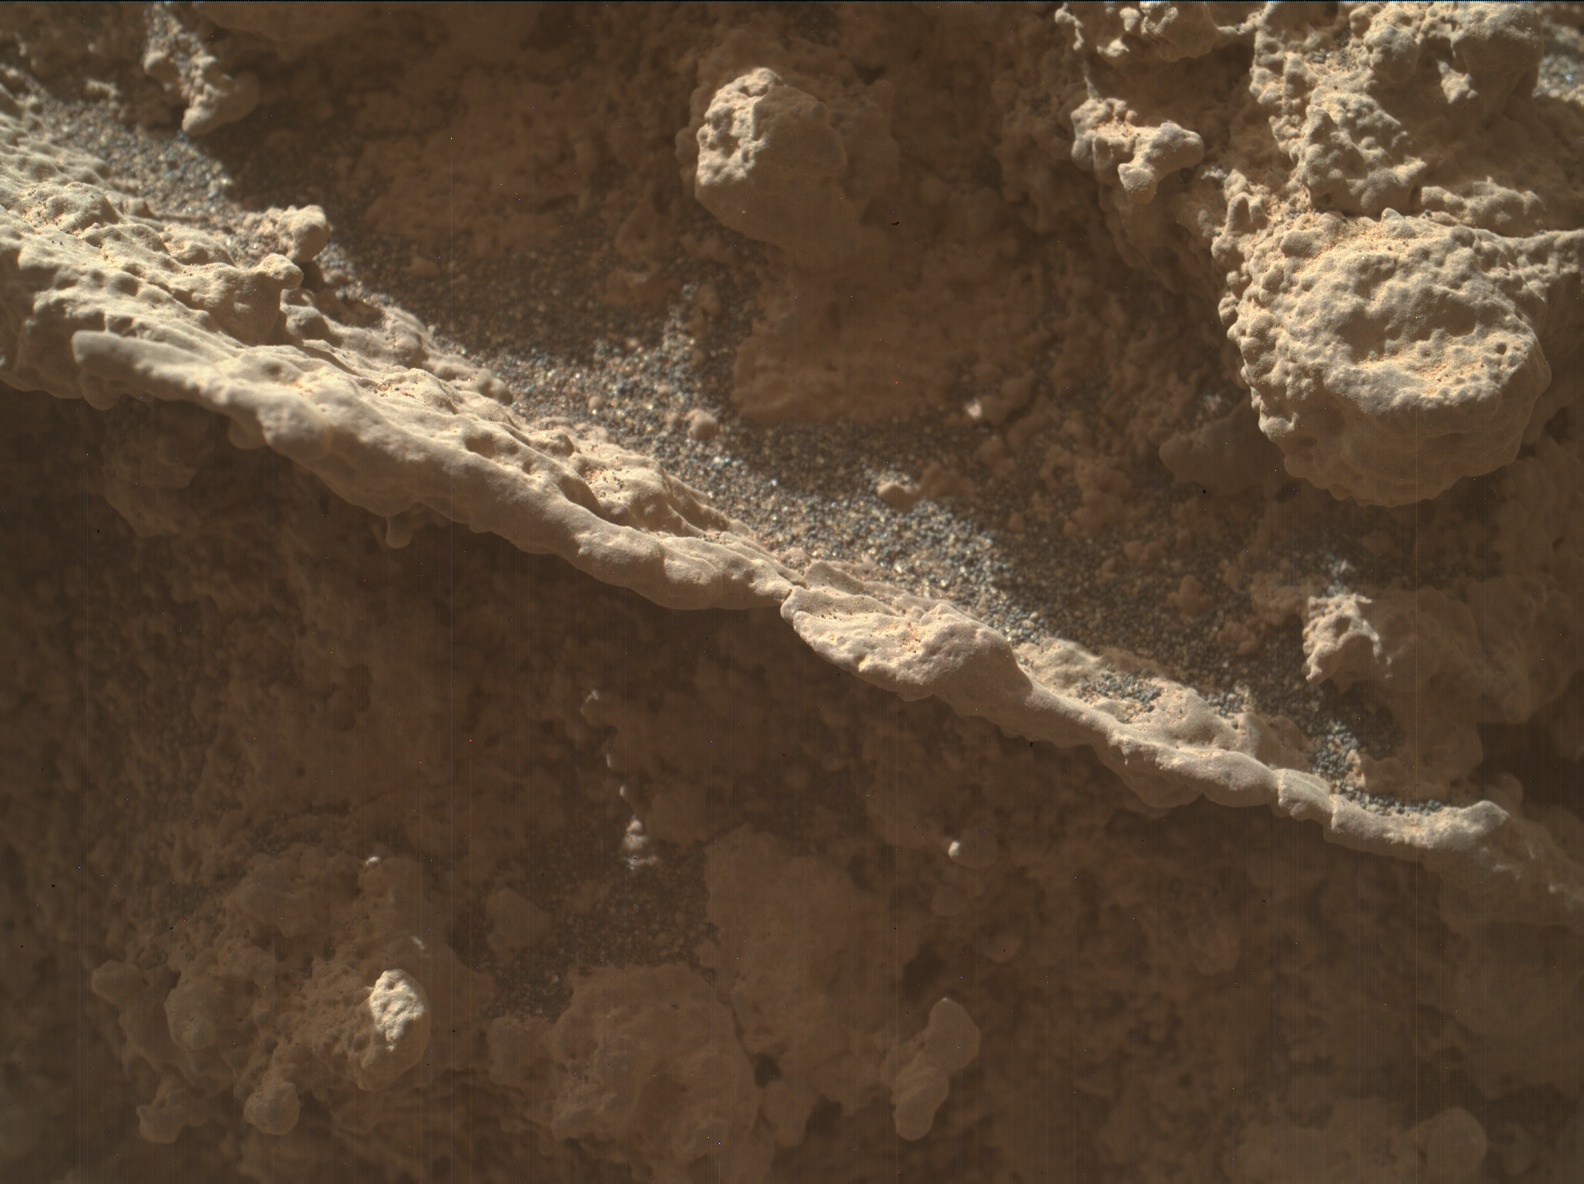 Nasa's Mars rover Curiosity acquired this image using its Mars Hand Lens Imager (MAHLI) on Sol 3599